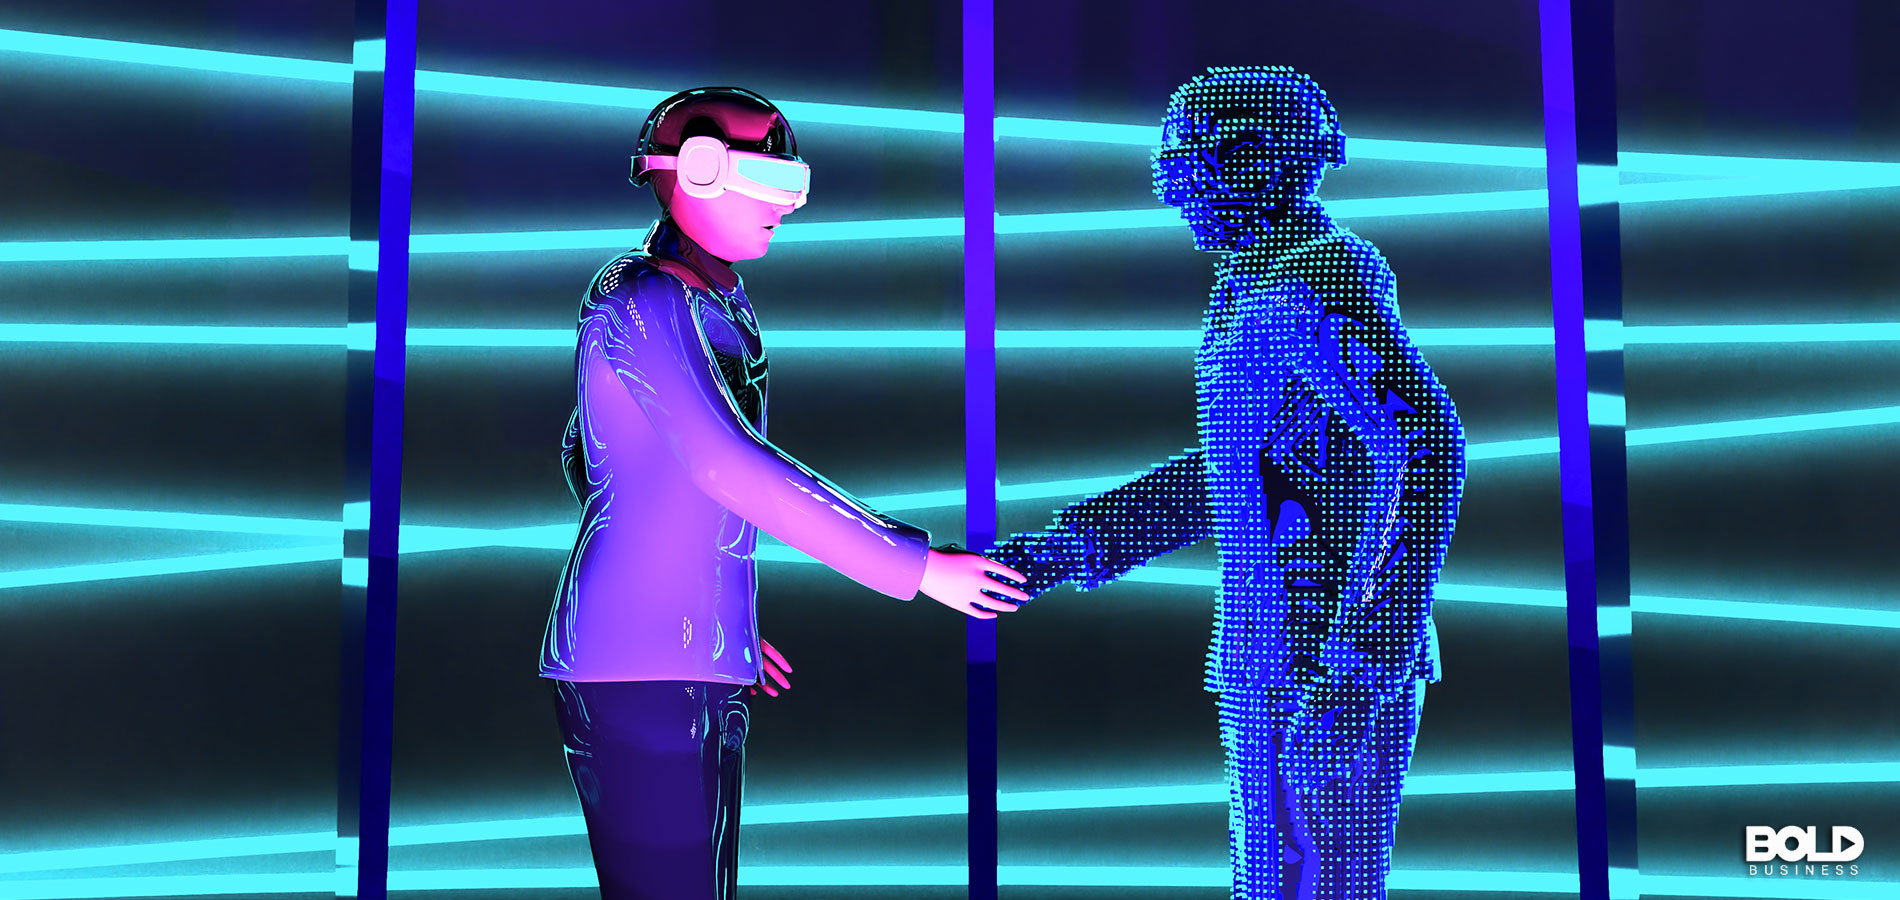 BOLD OPINION: The Metaverse Is Evolution, Not Dystopian